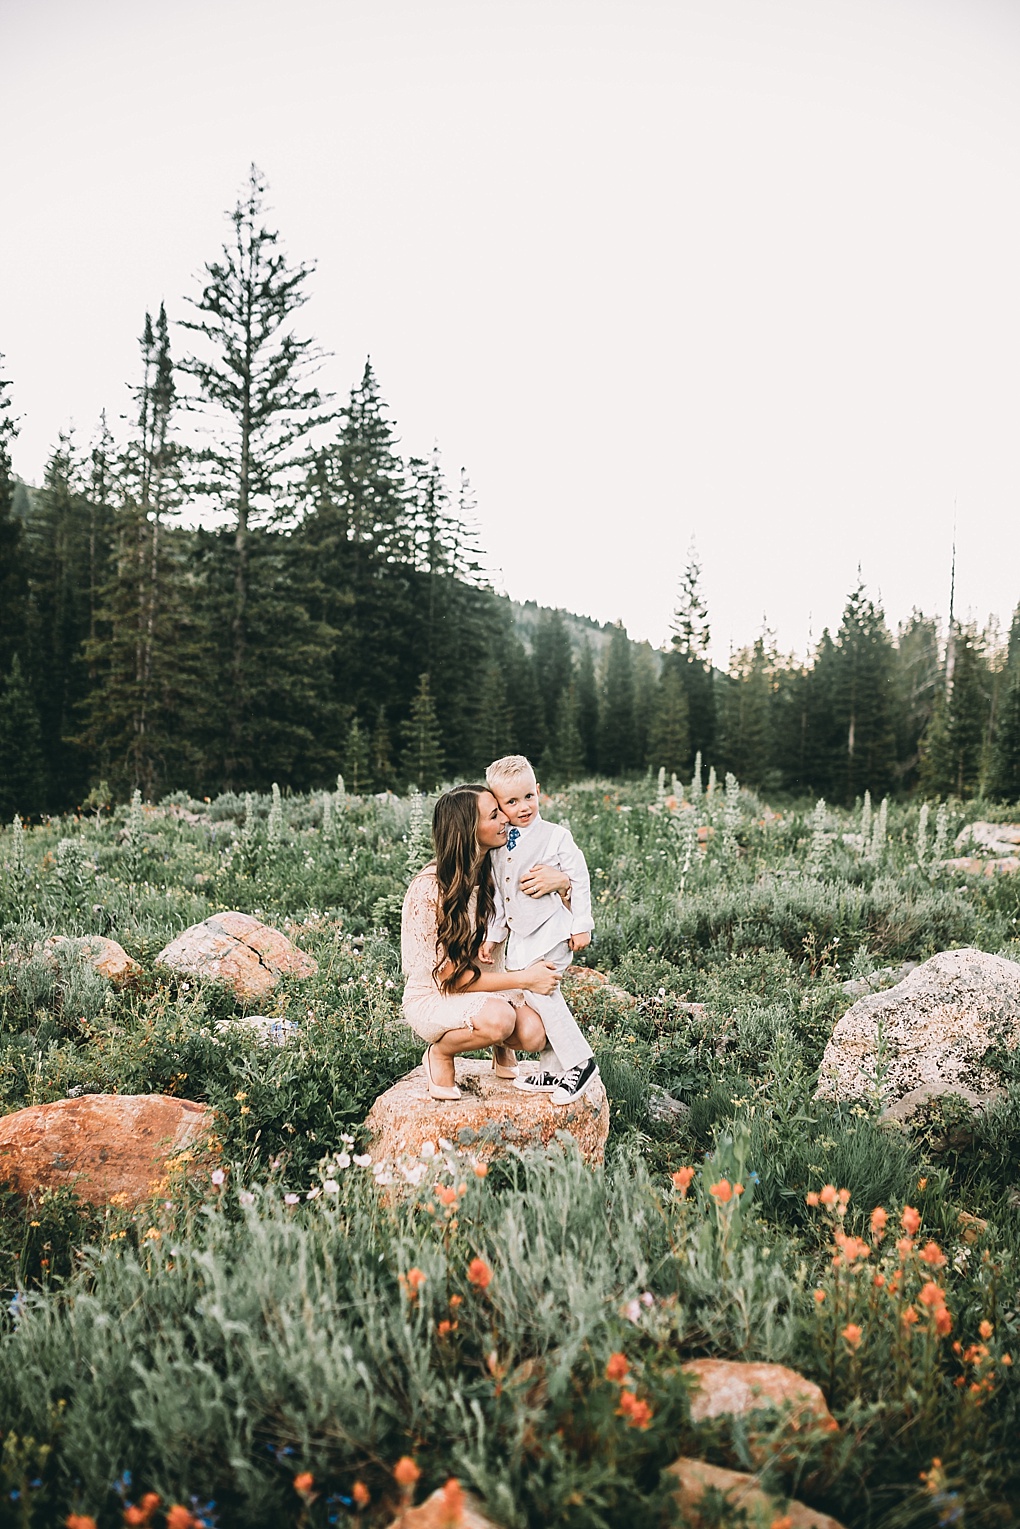 Bookmark this post ASAP if you need help planning your family photo. Utah Style Blogger Dani Marie is sharing her tip family photo outfit ideas here! 